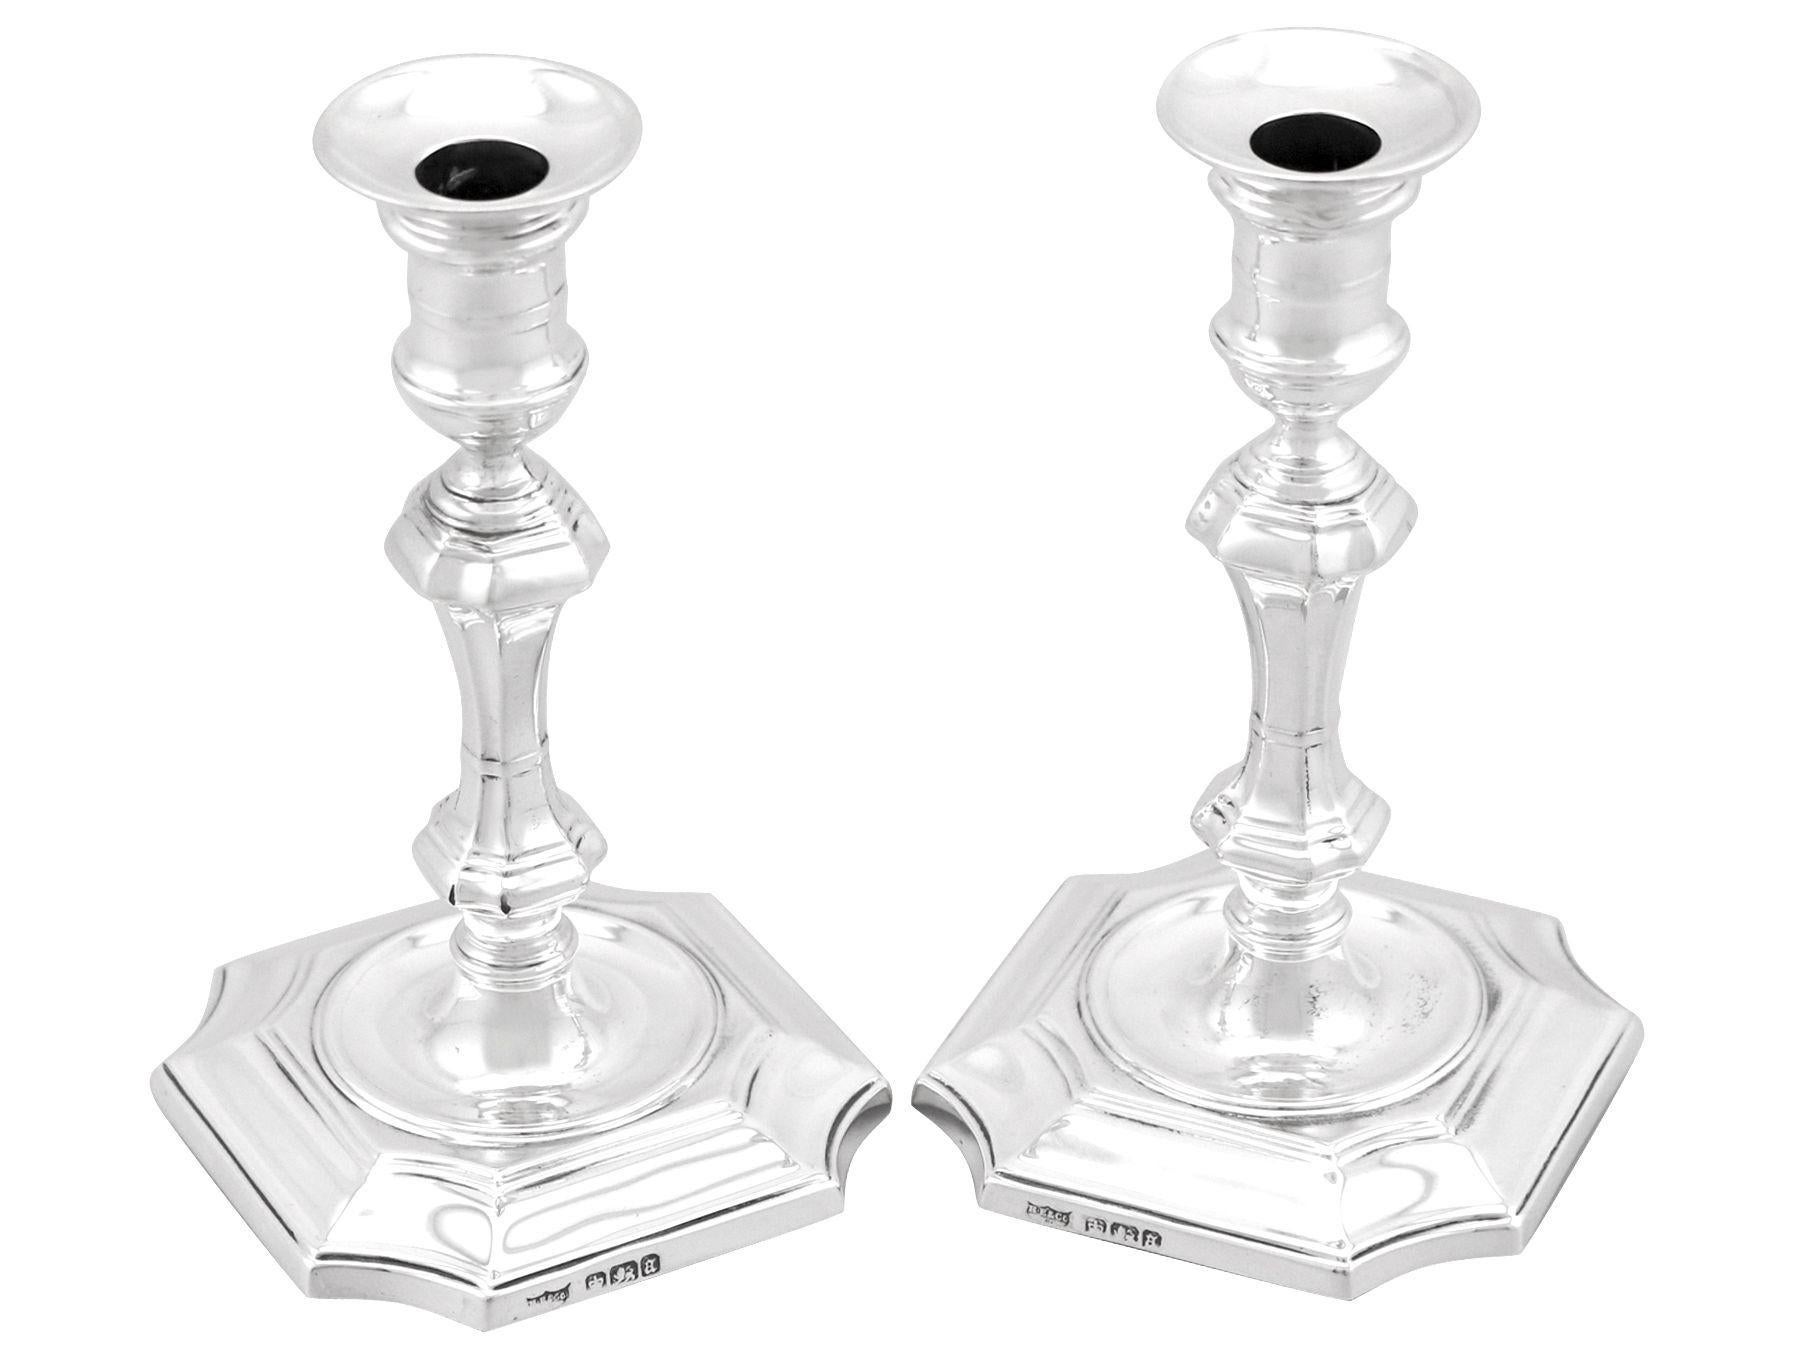 An exceptional, fine and impressive pair of antique Victorian English sterling silver taper candlesticks; an addition of our ornamental silverware collection

These exceptional antique Victorian sterling silver taper candlesticks have a plain